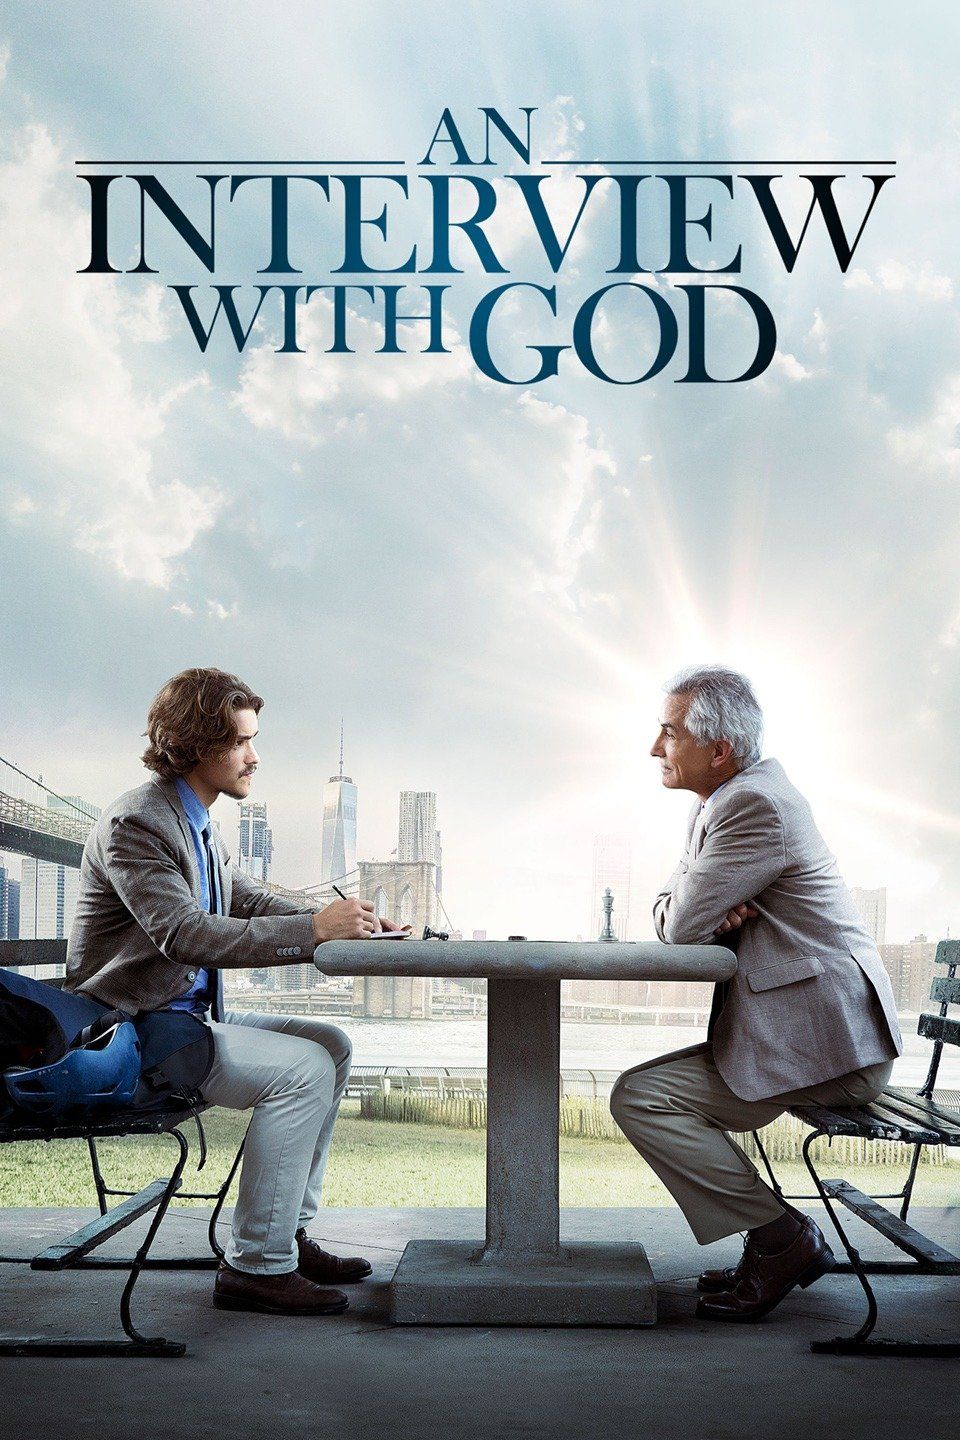 conversations with god movie